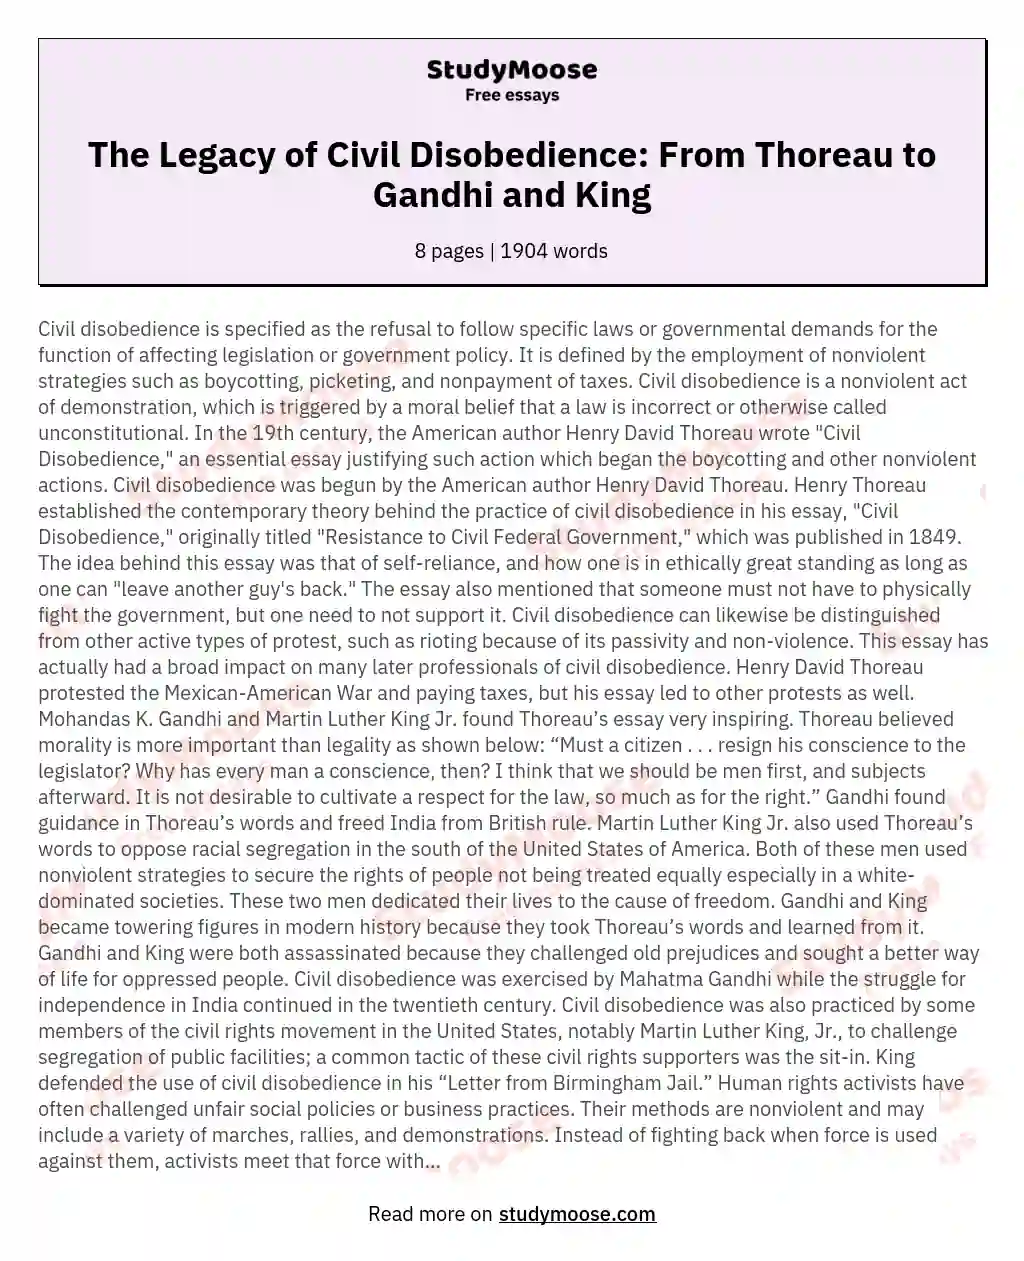 civil disobedience research paper